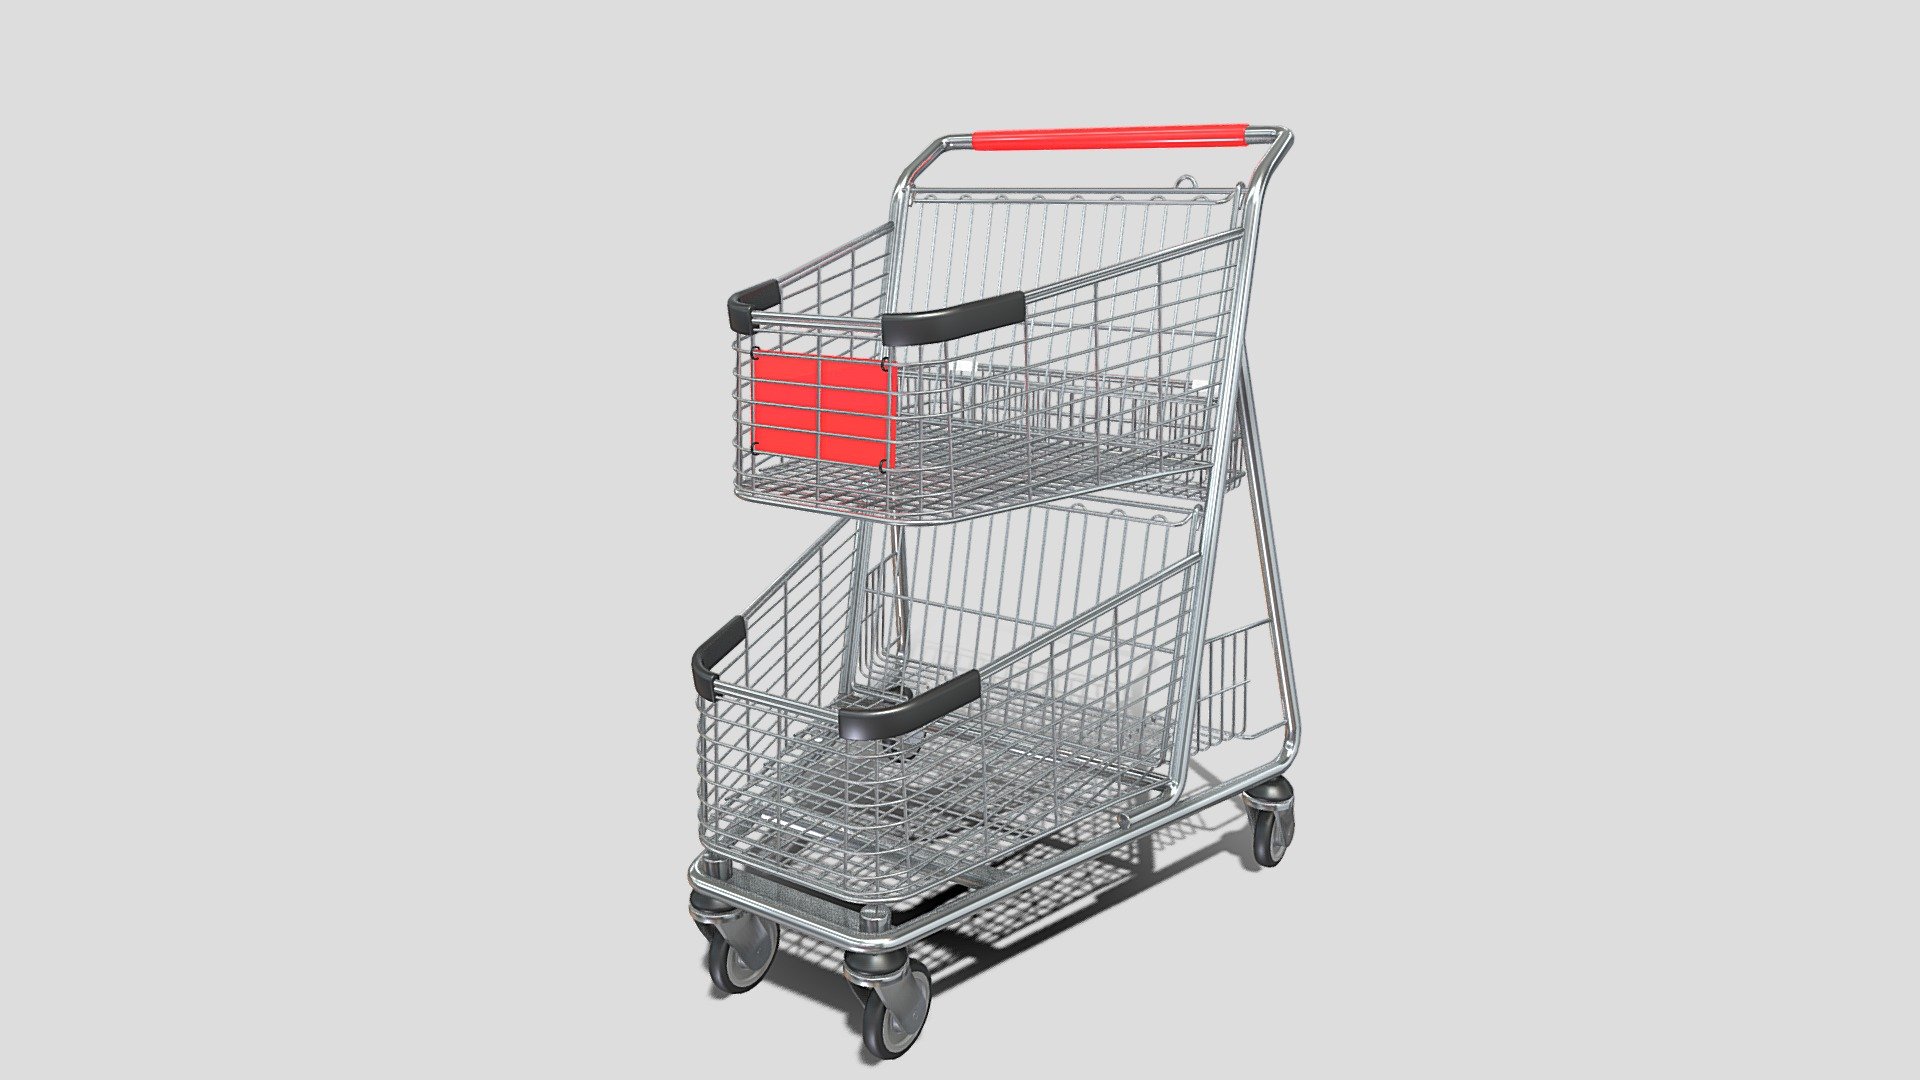 Shopping cart 3d model rendered with Cycles in Blender, as per seen on attached images. 
The model is scaled to real-life scale.

File formats:
-.blend, rendered with cycles, as seen in the images;
-.obj, with materials applied;
-.dae, with materials applied;
-.fbx, with materials applied;
-.stl;

Files come named appropriately and split by file format.

3D Software:
The 3D model was originally created in Blender 3.1 and rendered with Cycles.

Materials and textures:
The models have materials applied in all formats, and are ready to import and render.
Materials are image based using PBR, the model comes with five 4k png image textures.

Preview scenes:
The preview images are rendered in Blender using its built-in render engine &lsquo;Cycles'.
Note that the blend files come directly with the rendering scene included and the render command will generate the exact result as seen in previews.

For any problems please feel free to contact me.

Don't forget to rate and enjoy! - Shopping cart v4 - Buy Royalty Free 3D model by dragosburian 3d model